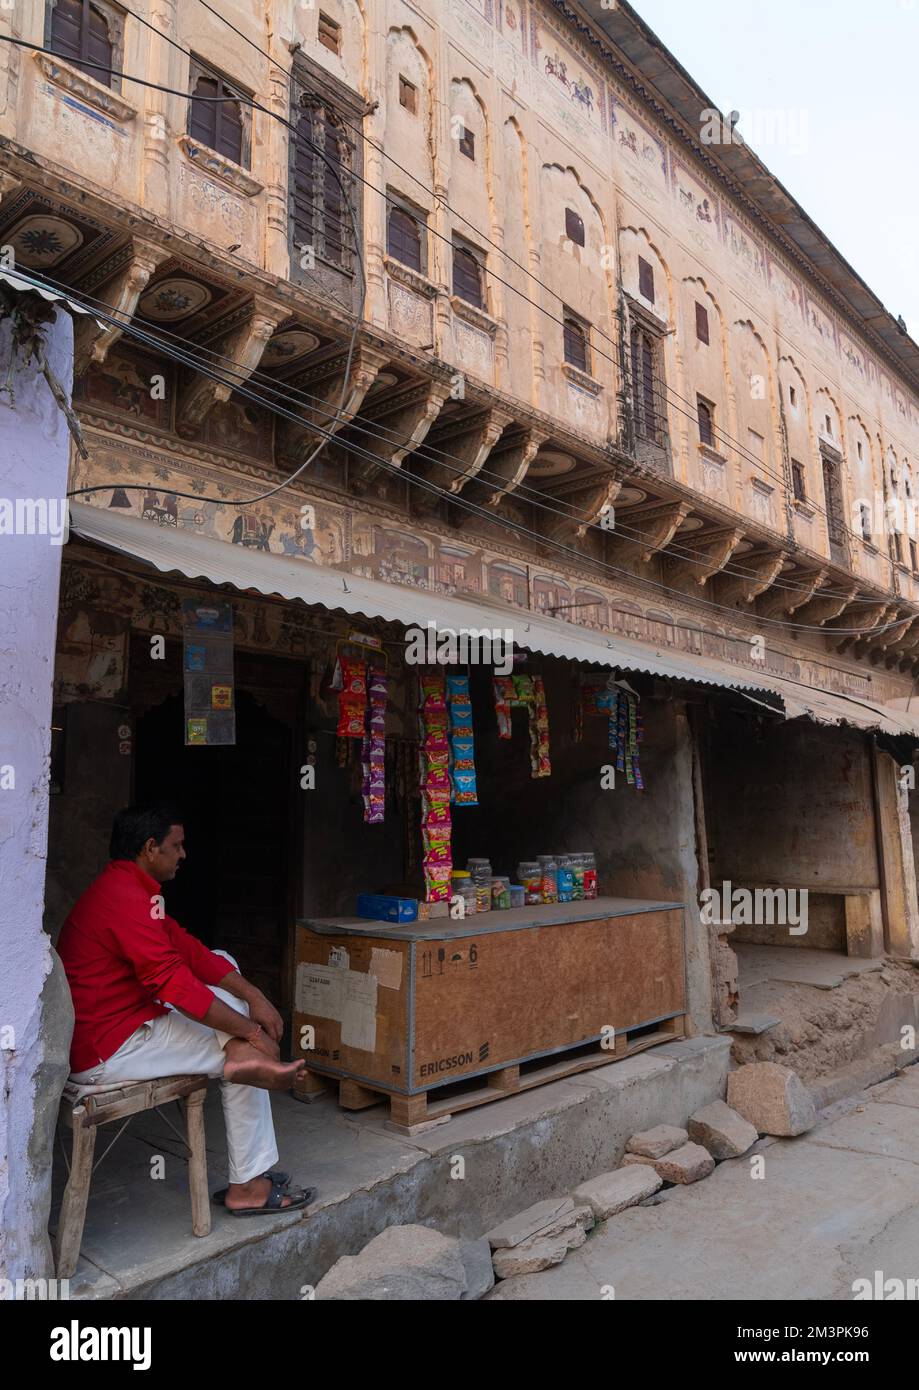 Old historic building in town, Rajasthan, Mandawa, India Stock Photo